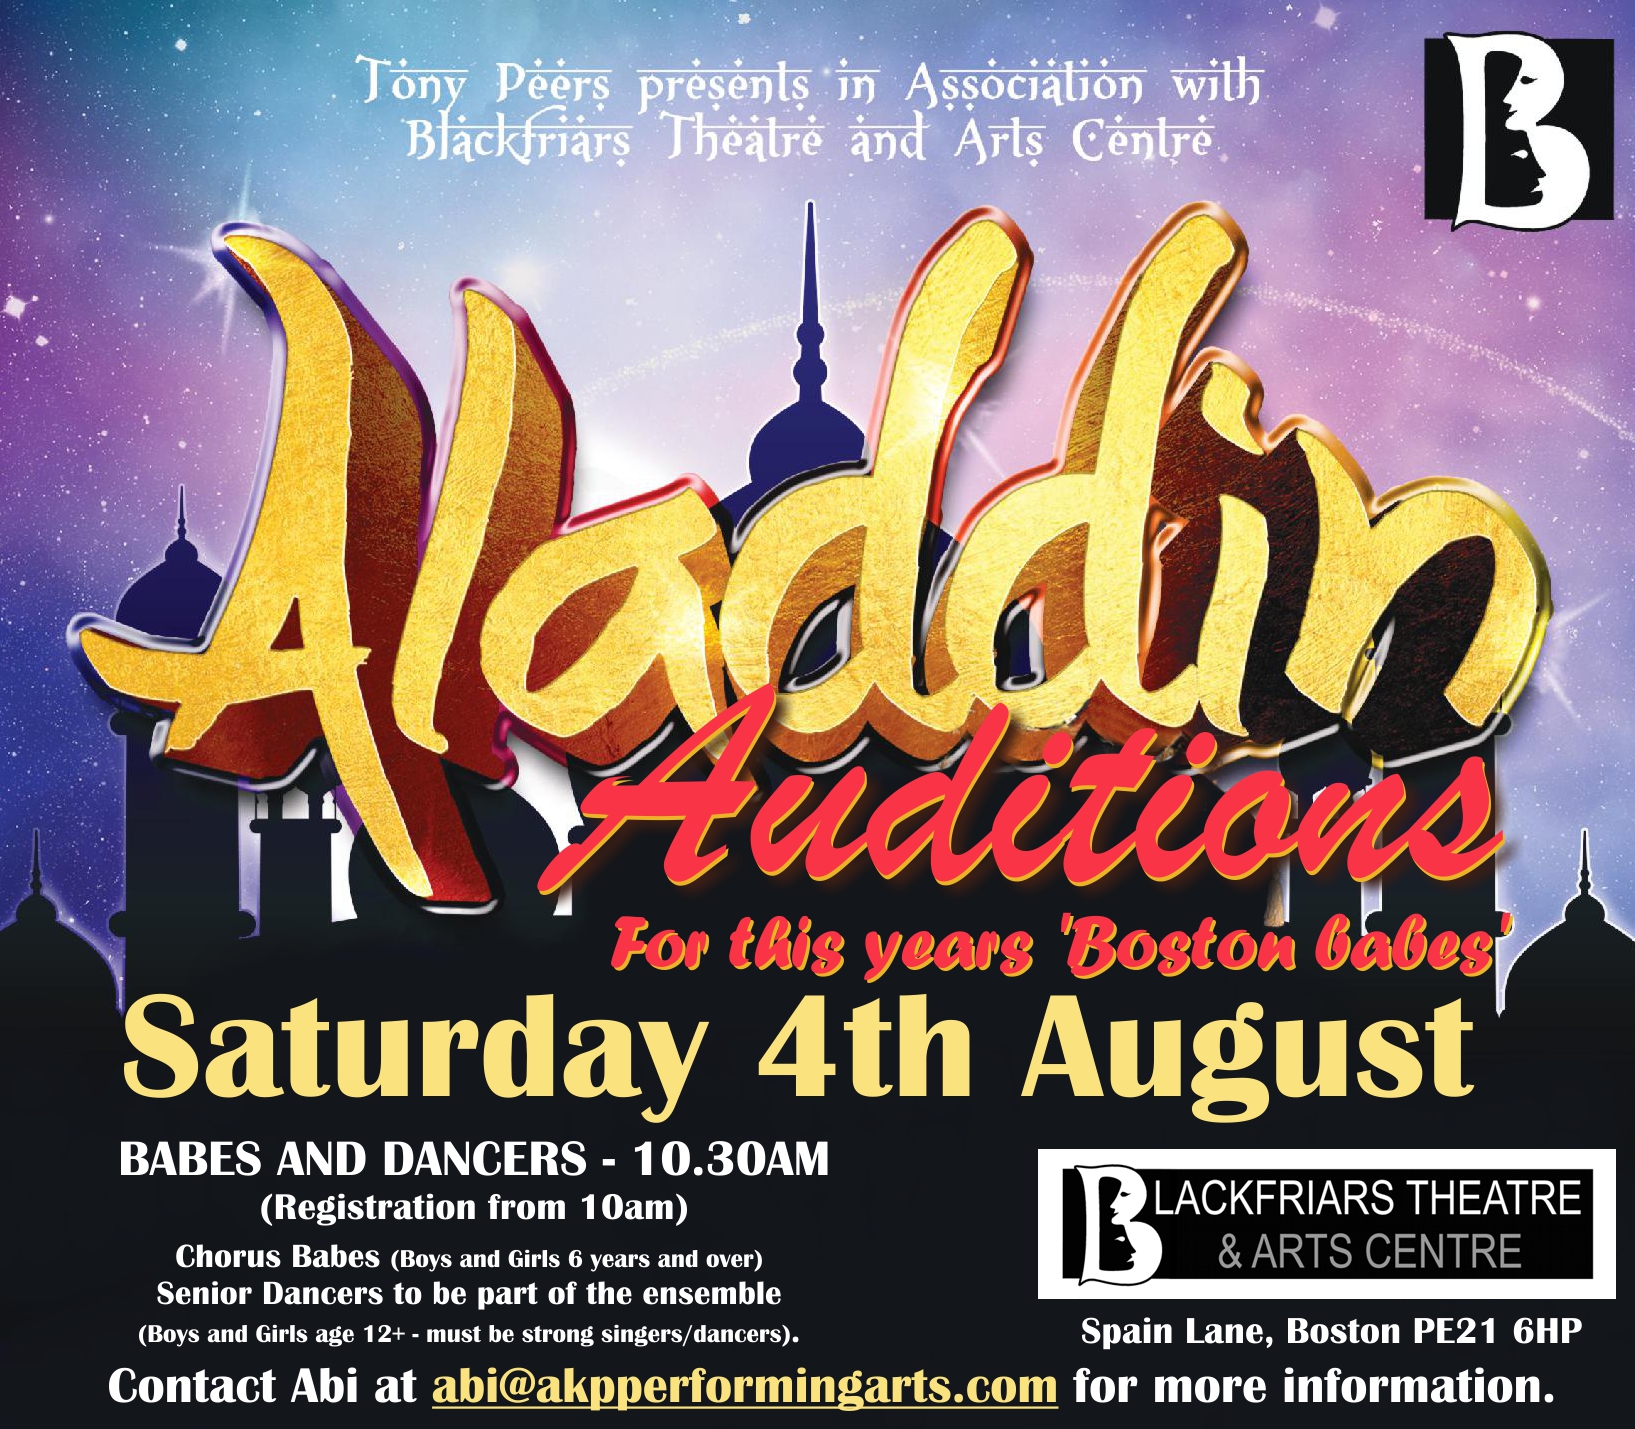 Aladdin Auditions for Boston Babes taking place on Saturday 4th August